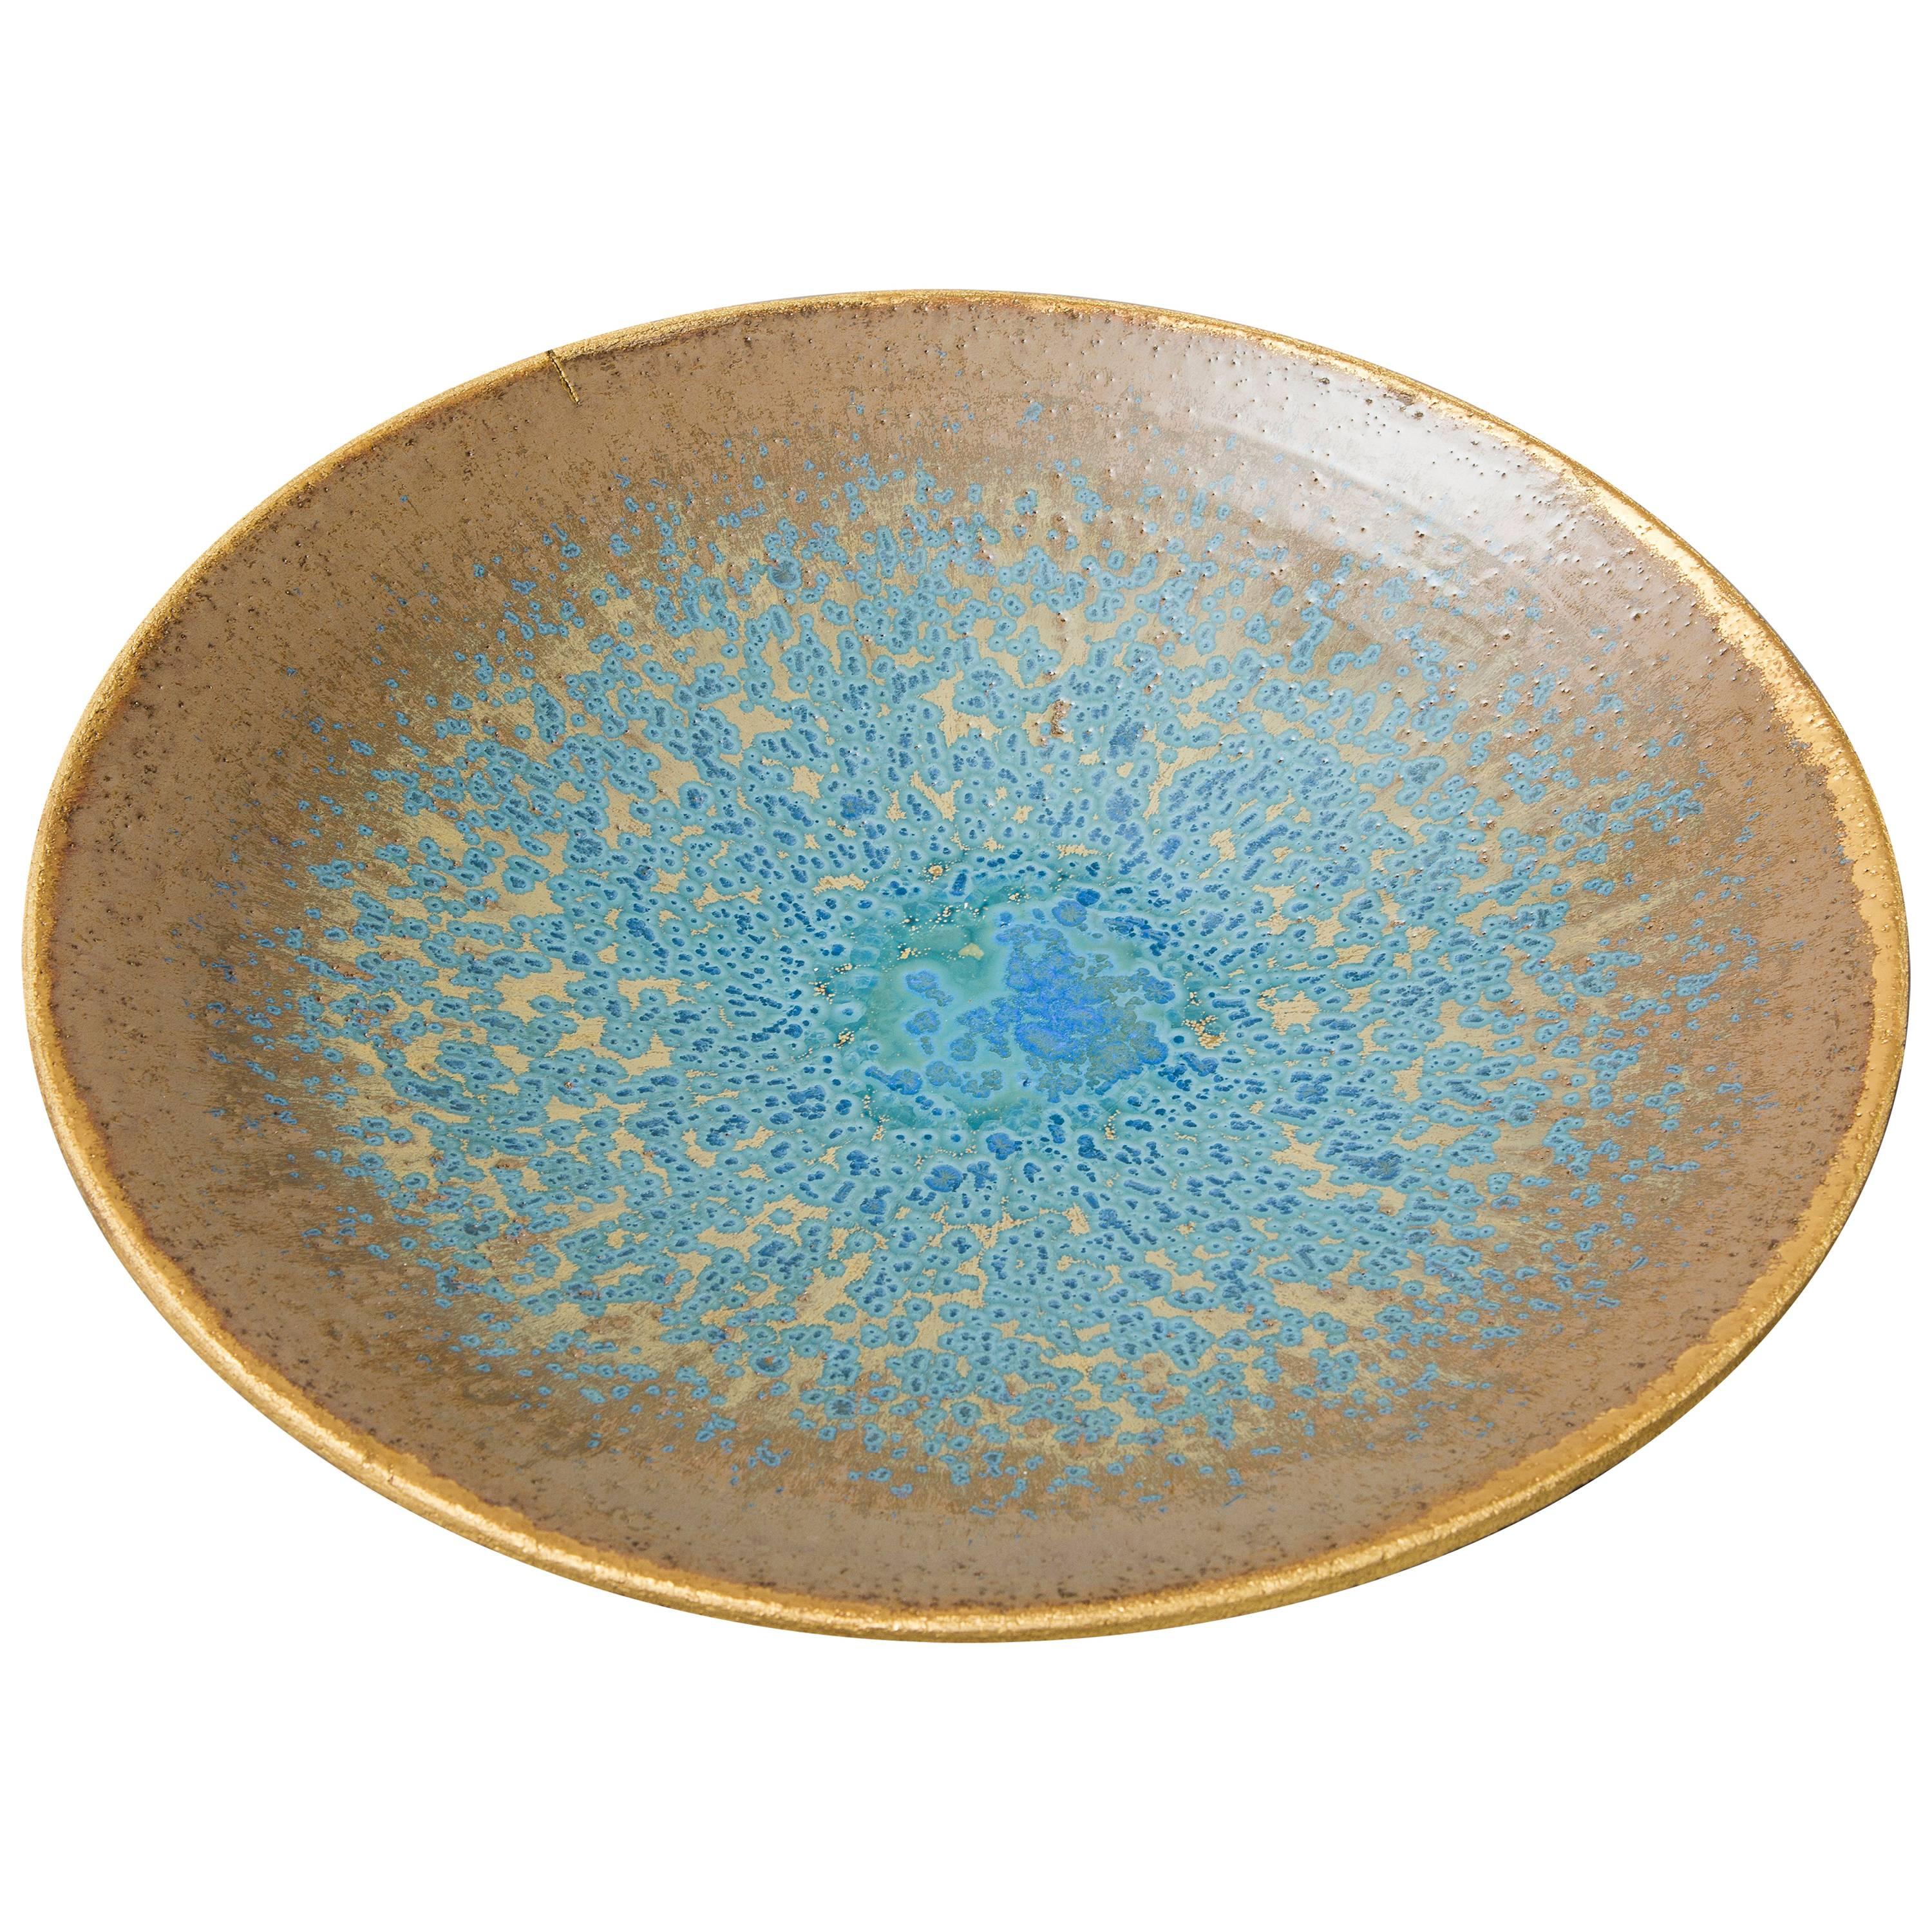 Turquoise and Gold Red Stoneware Bowl 'Constellation' CB/02, 2017 by Karen Swami For Sale